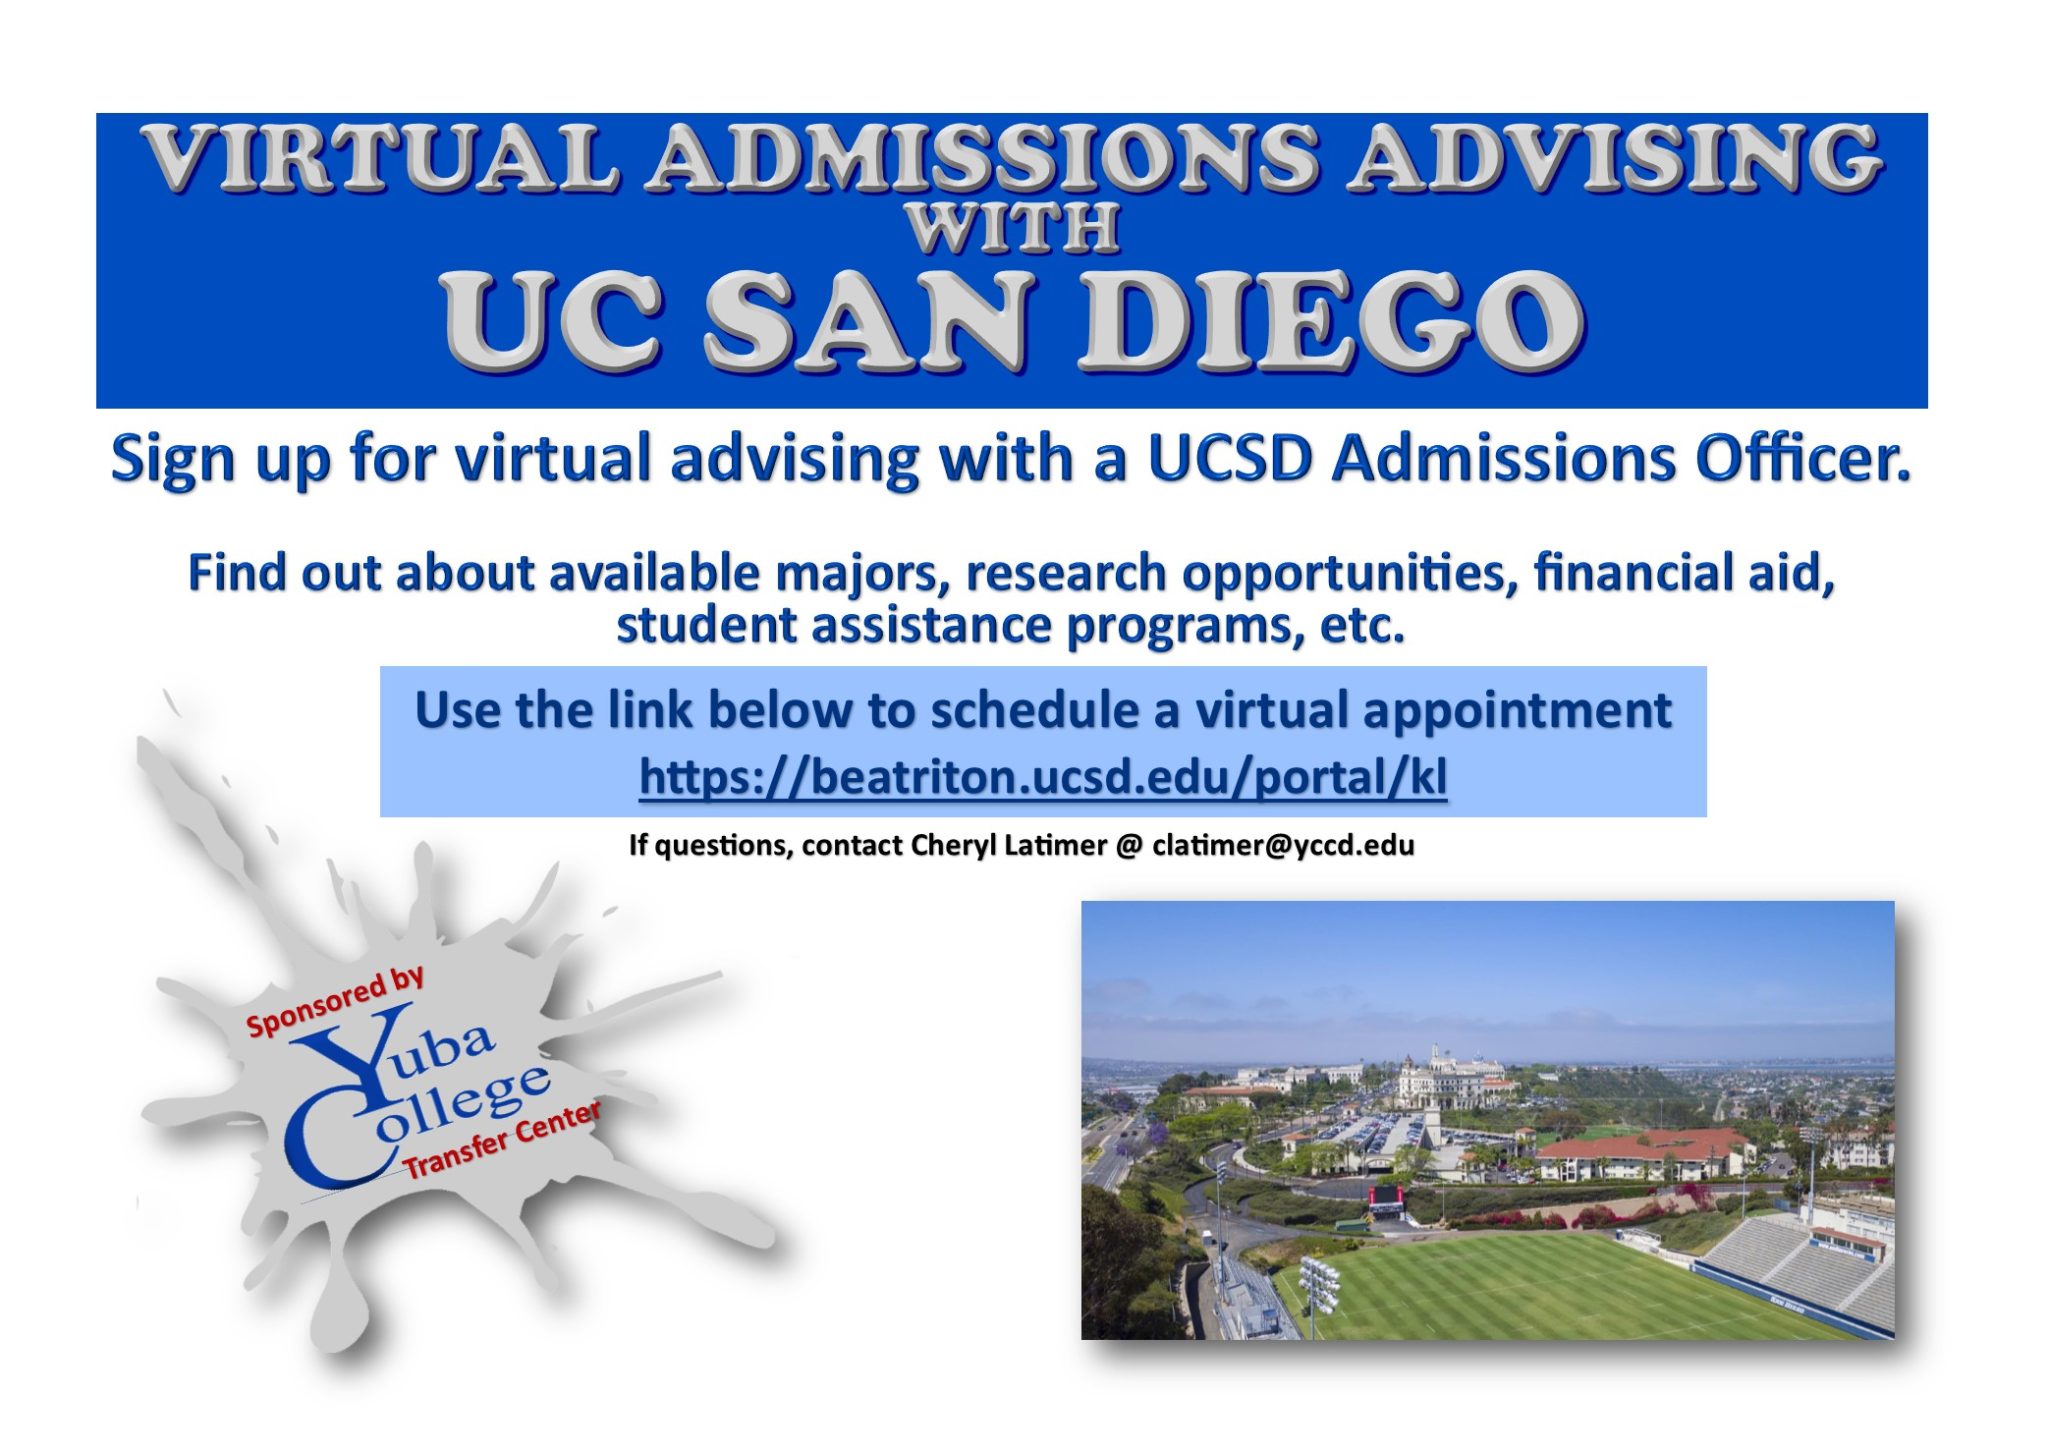 UCSD Virtual Admissions Advising Spring 2020 - Welcome to Yuba College